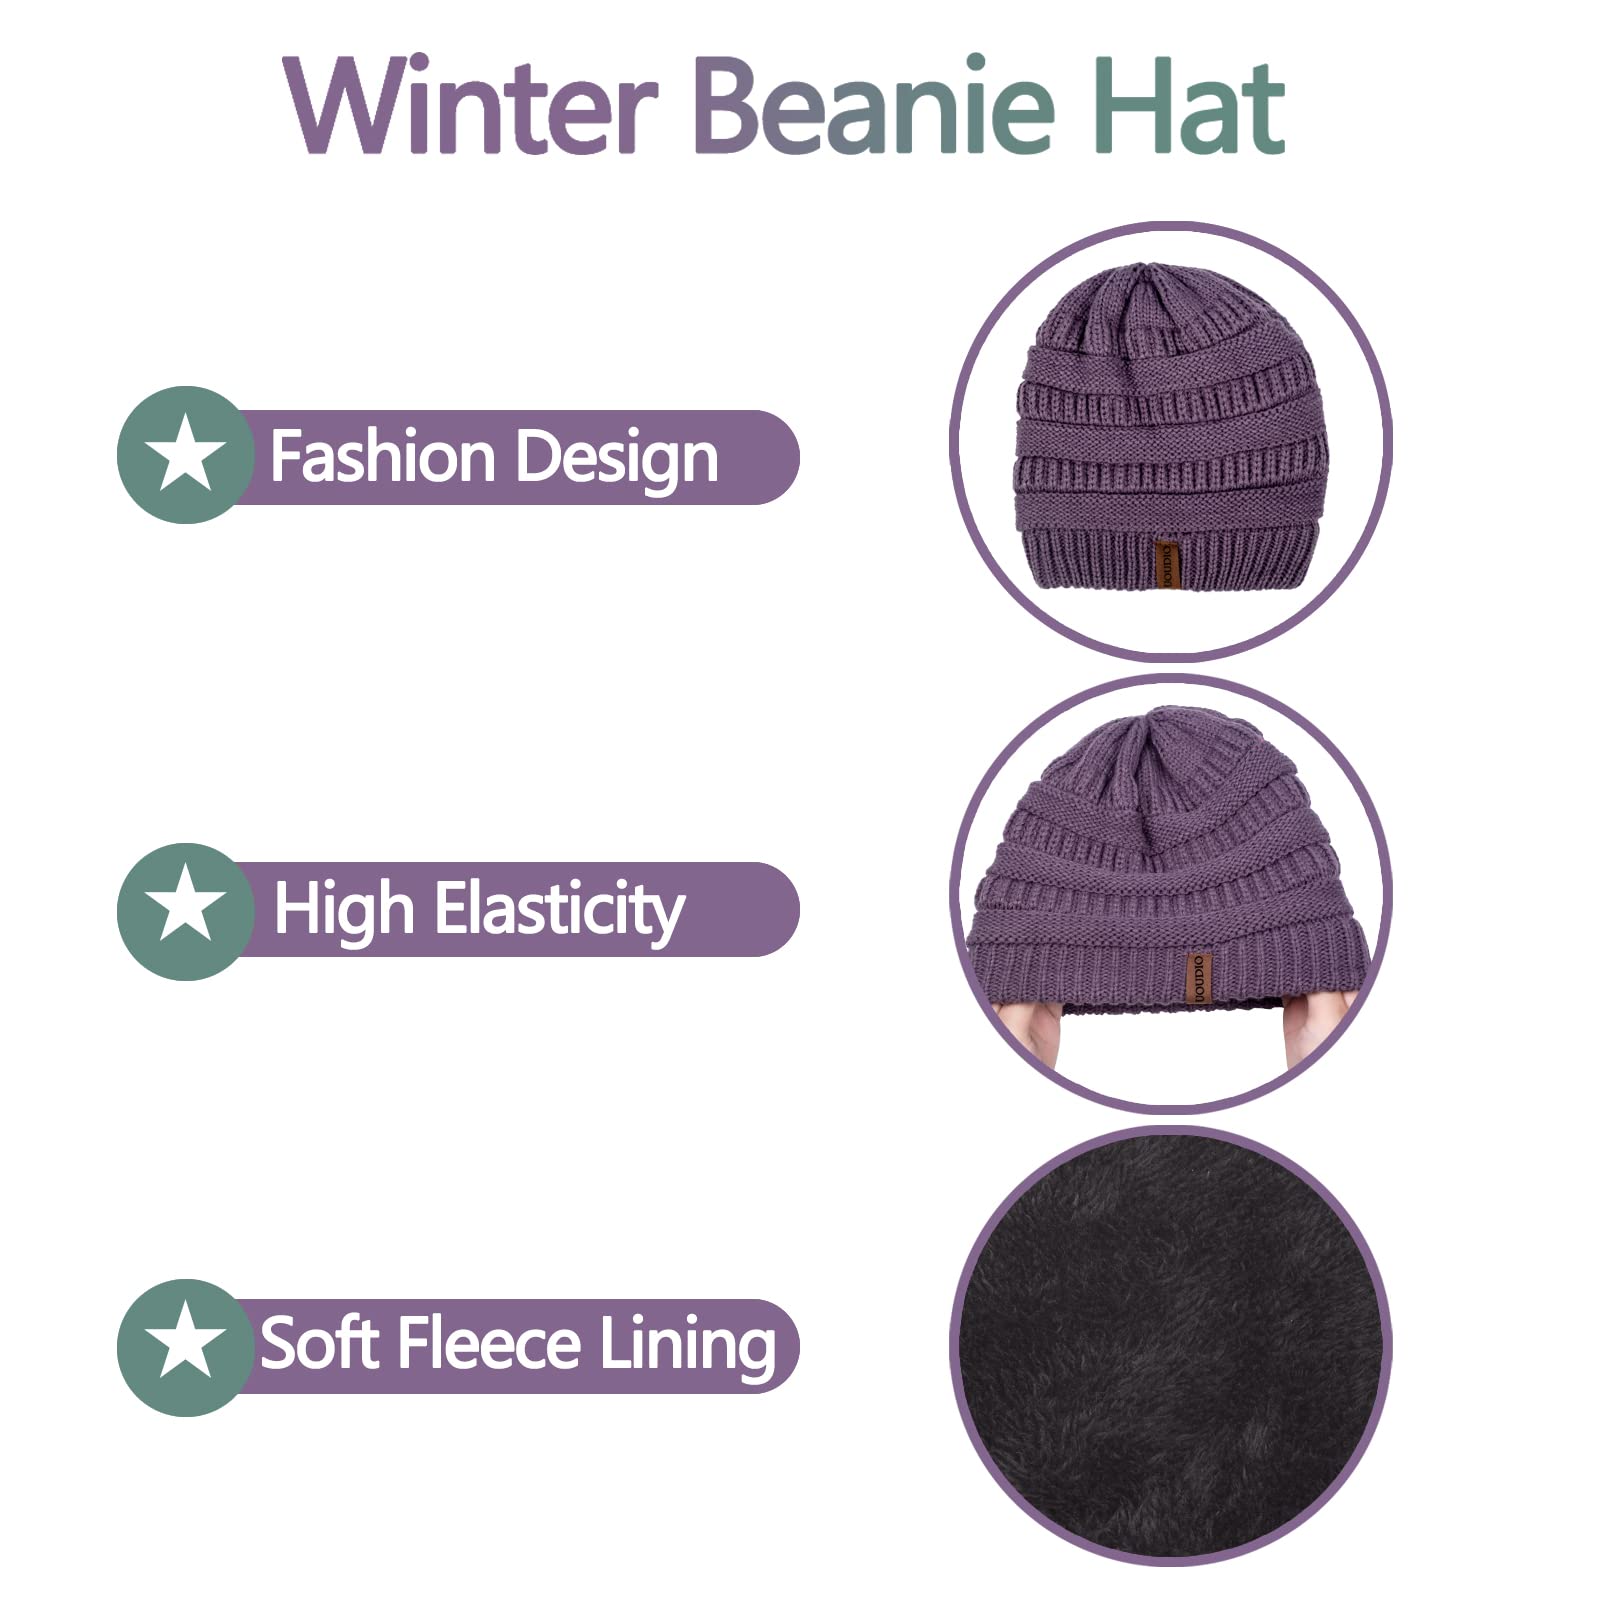 Women Beanie Hat Gloves and Scarf Set Winter Warm Knit Cap Thick Fleece Lined Neck Warmer Purple Snow Ski Cold Weather, Gorras Gorros Guantes Bufandas de Invierno para Mujer, Gift for Mom